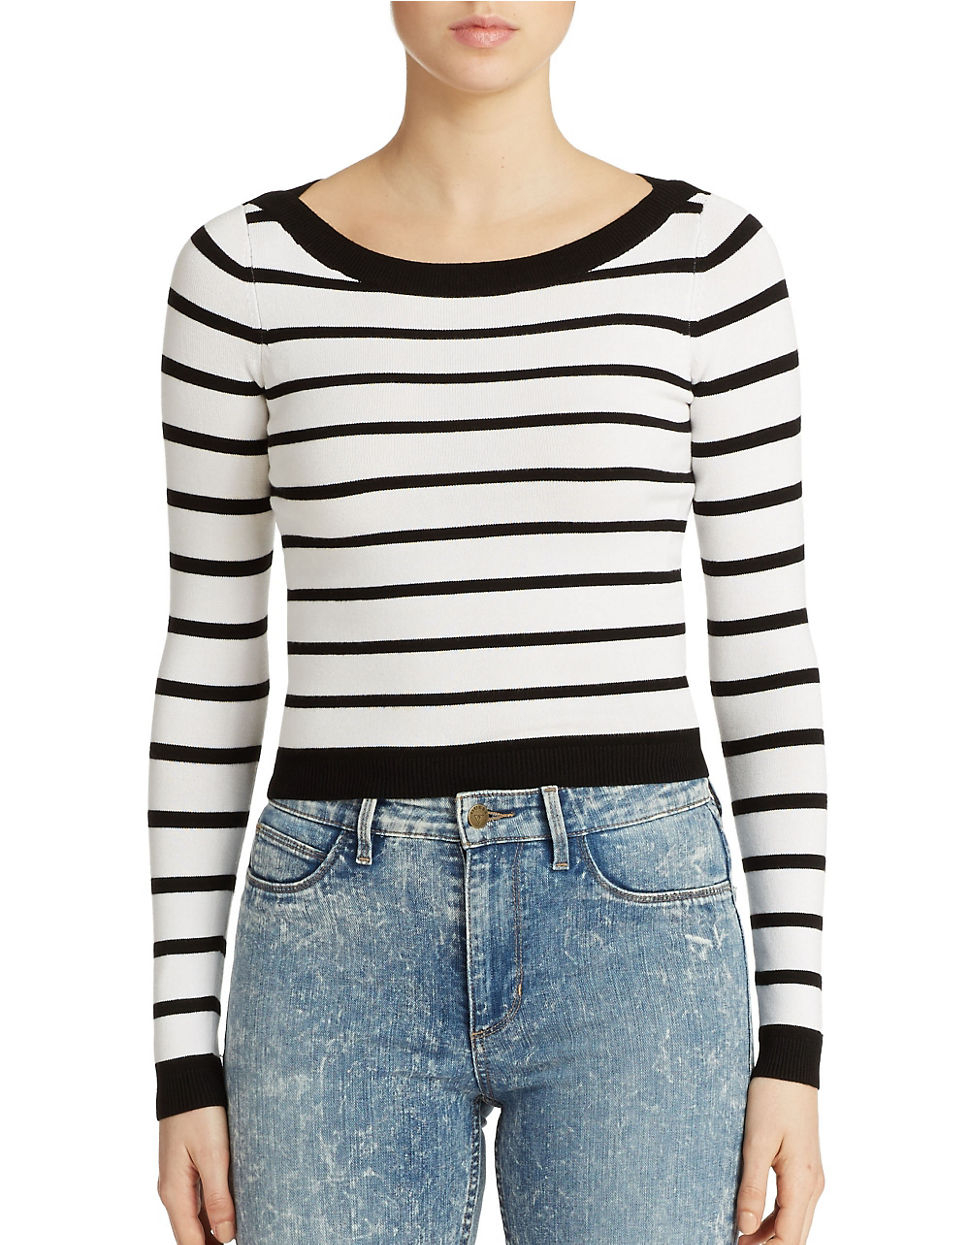 Lyst - Guess Striped Cropped Sweater in Blue